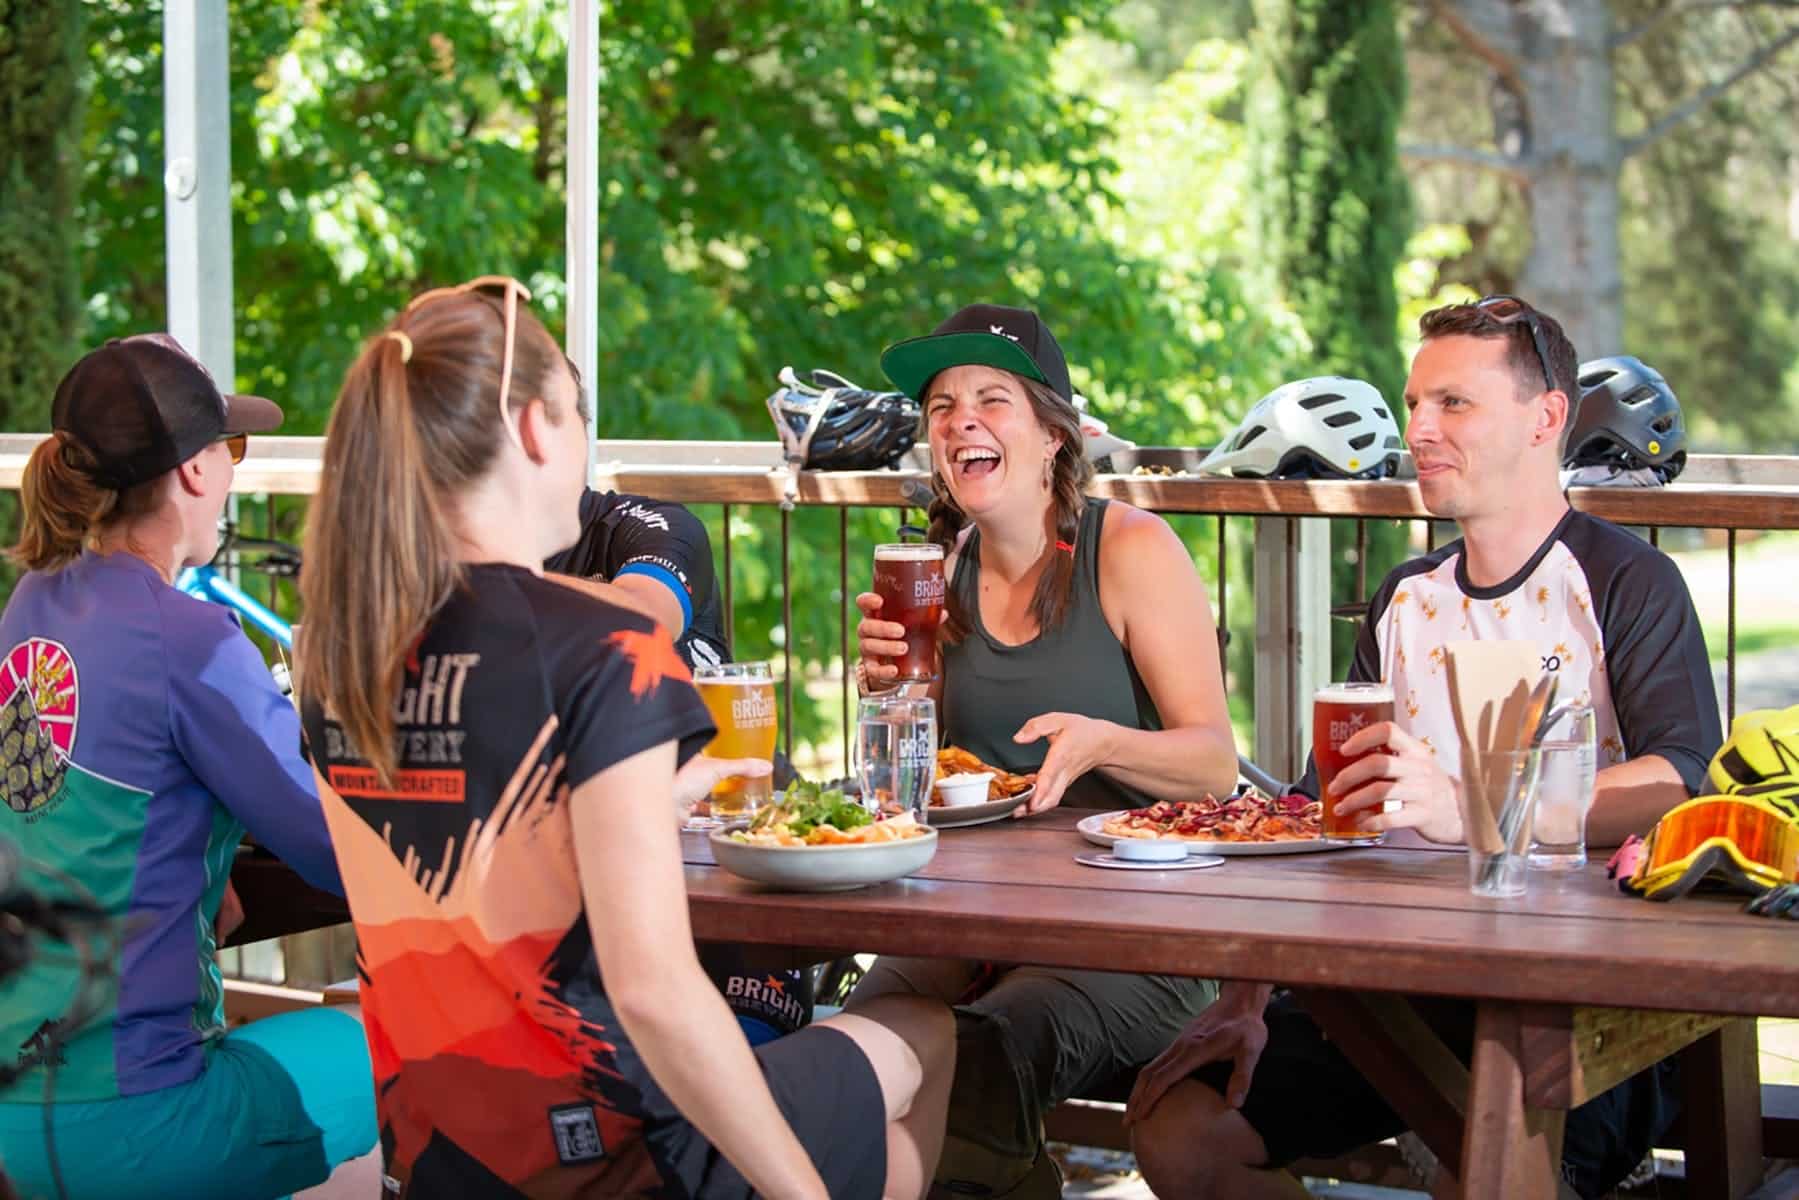 Four people sit around a table outside, eating food and drinking beer.